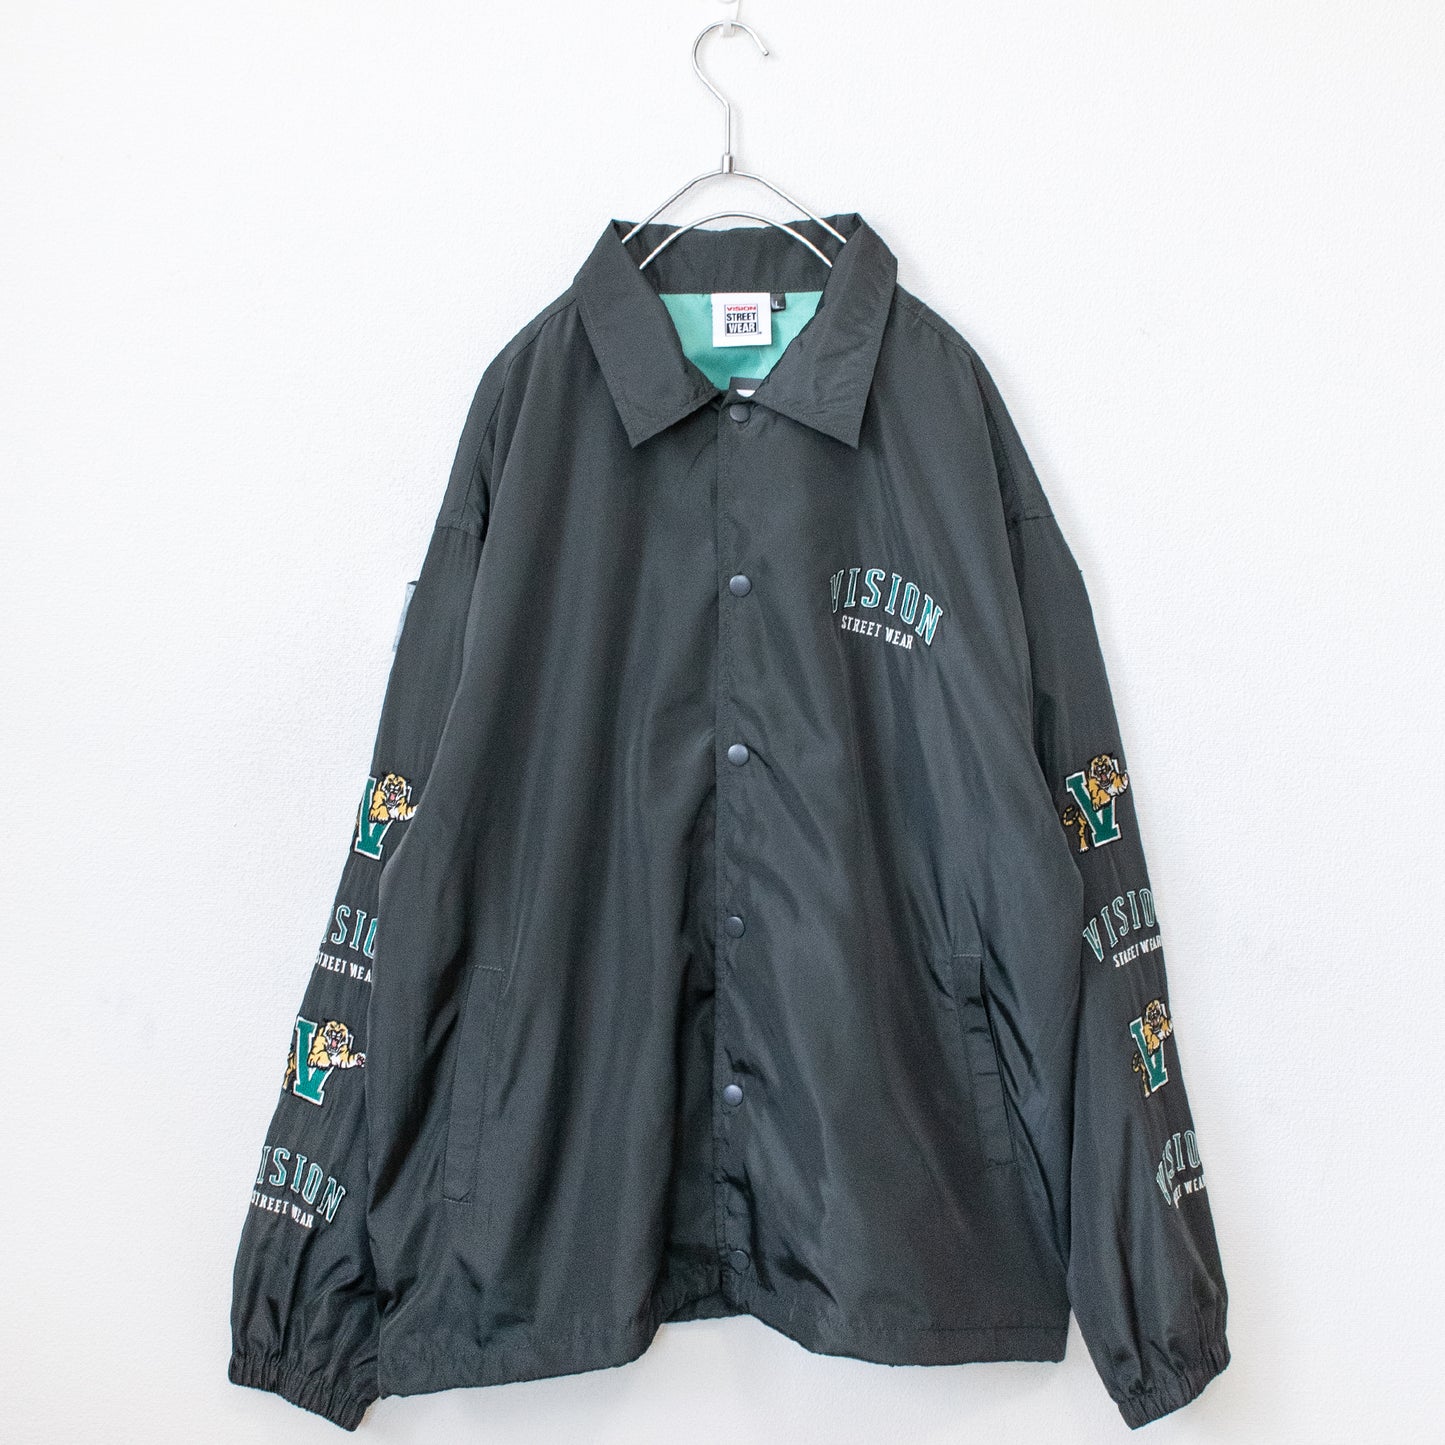 VISION STREET WEAR Embroidery Sleeve Coach Jacket - YOUAREMYPOISON